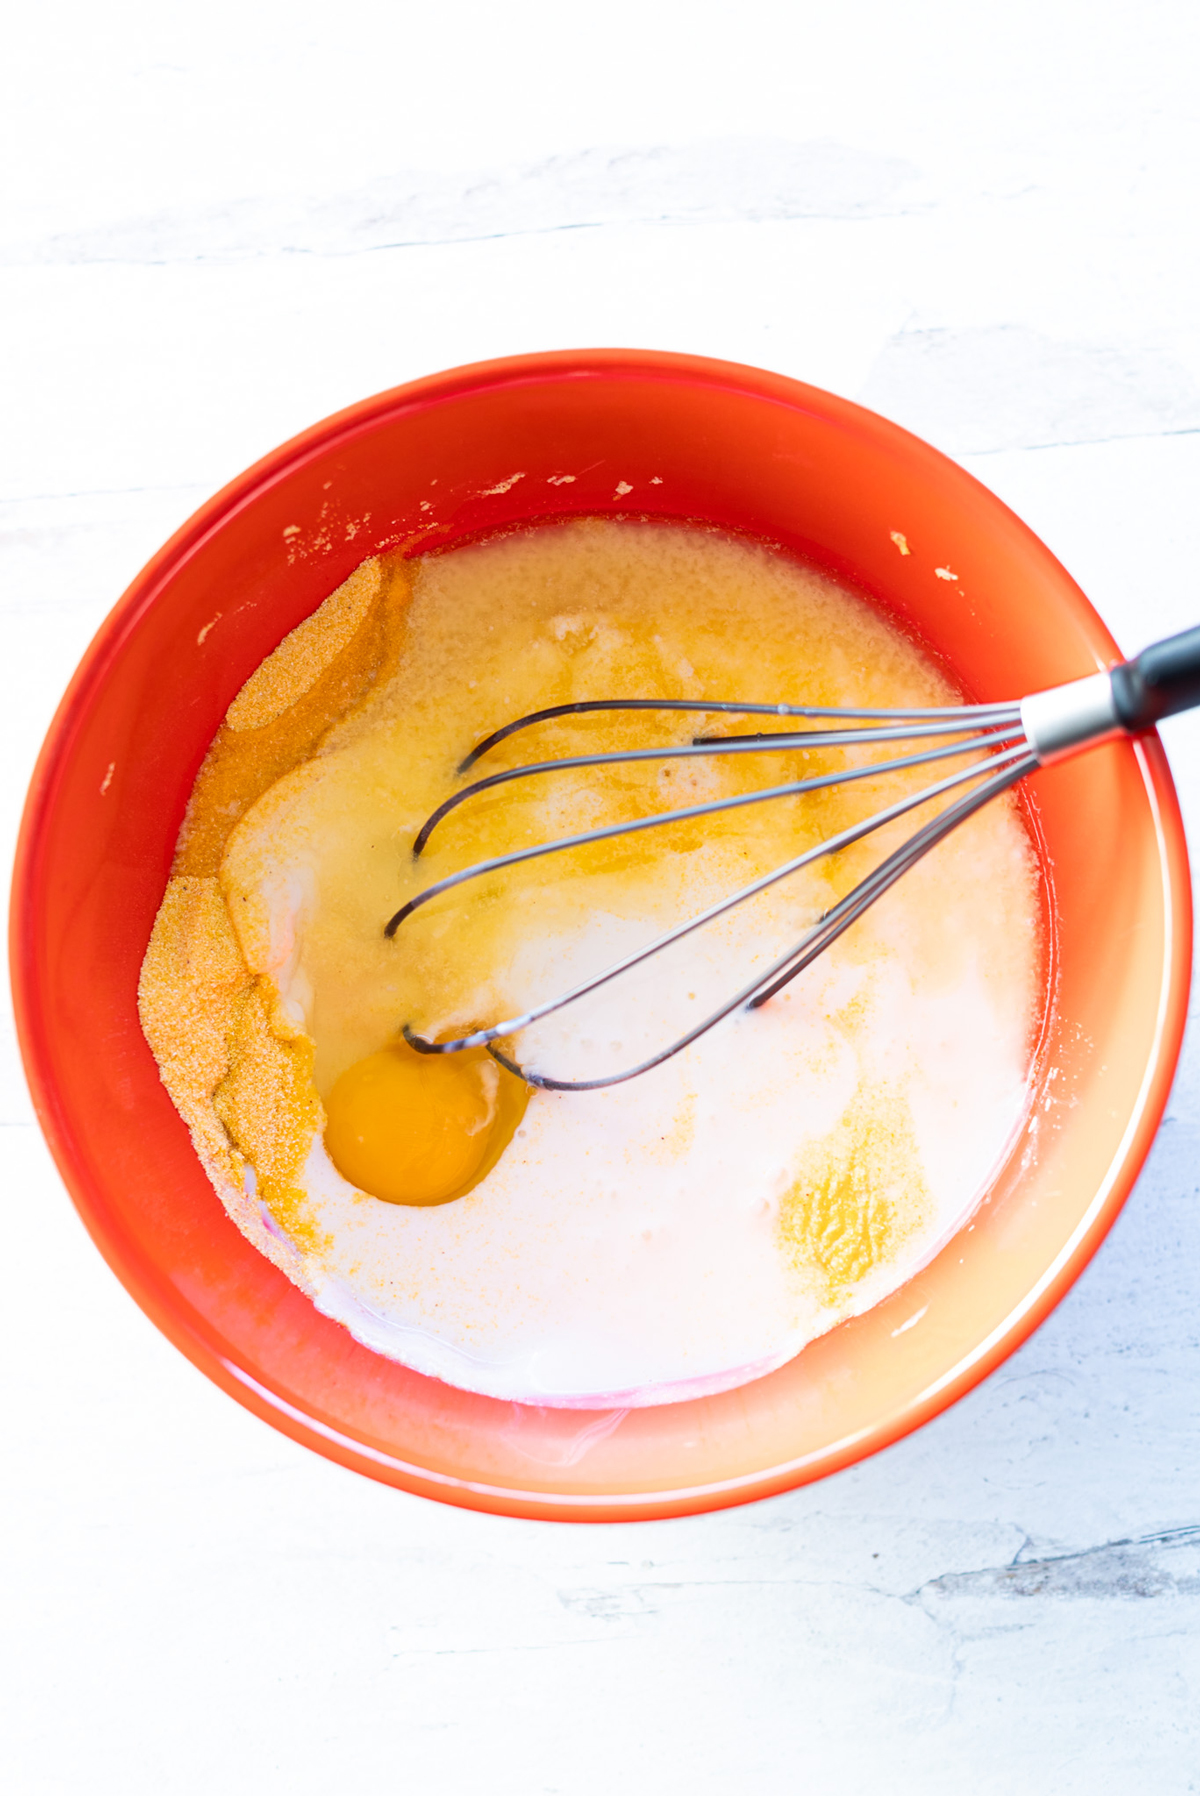 Person whisking wet ingredients into a bowl of dry ingredients to make cornbread.